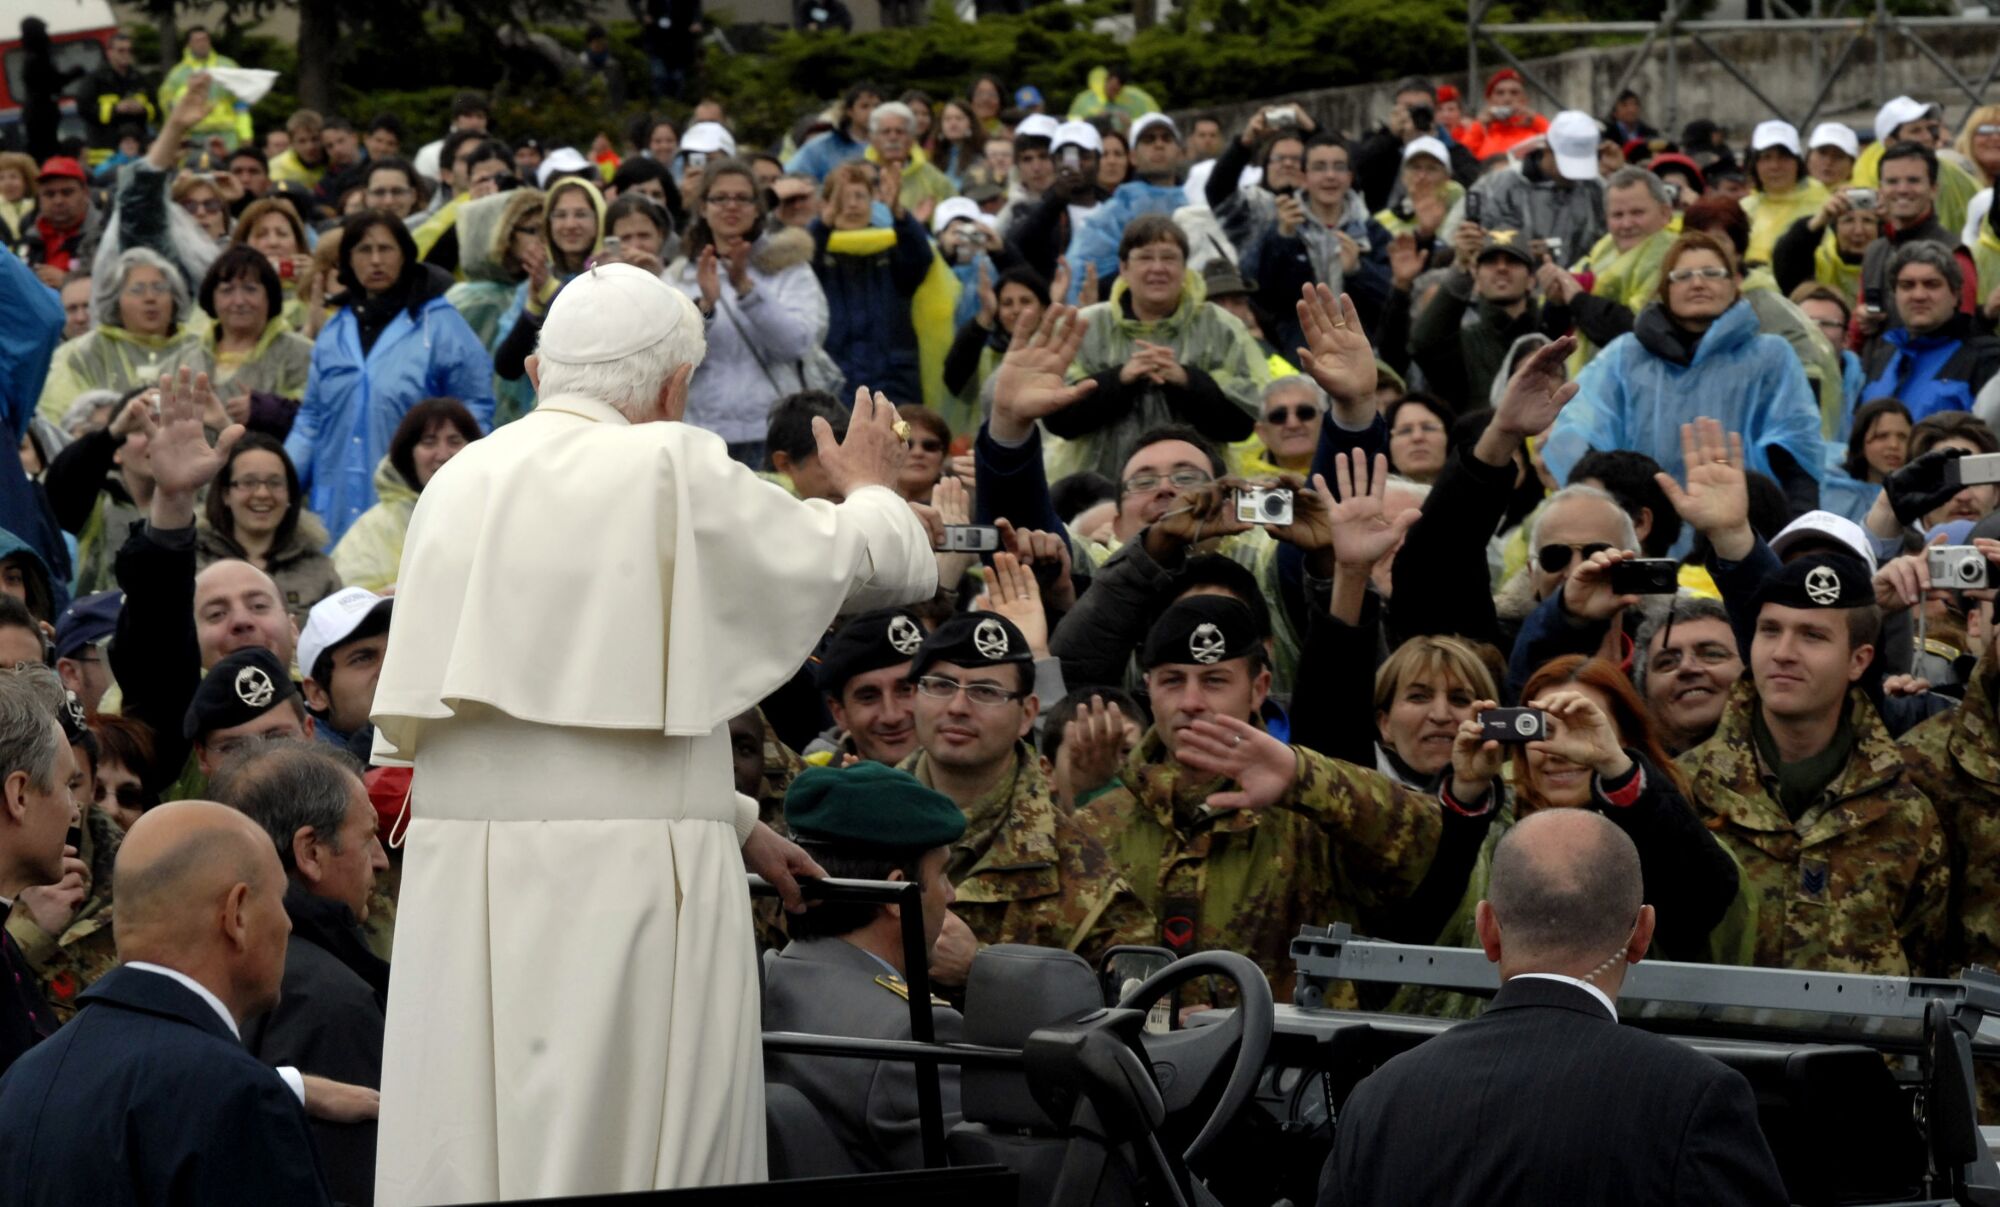 Pope Benedict XVI waves to people who include a group of soldiers in a crowd.